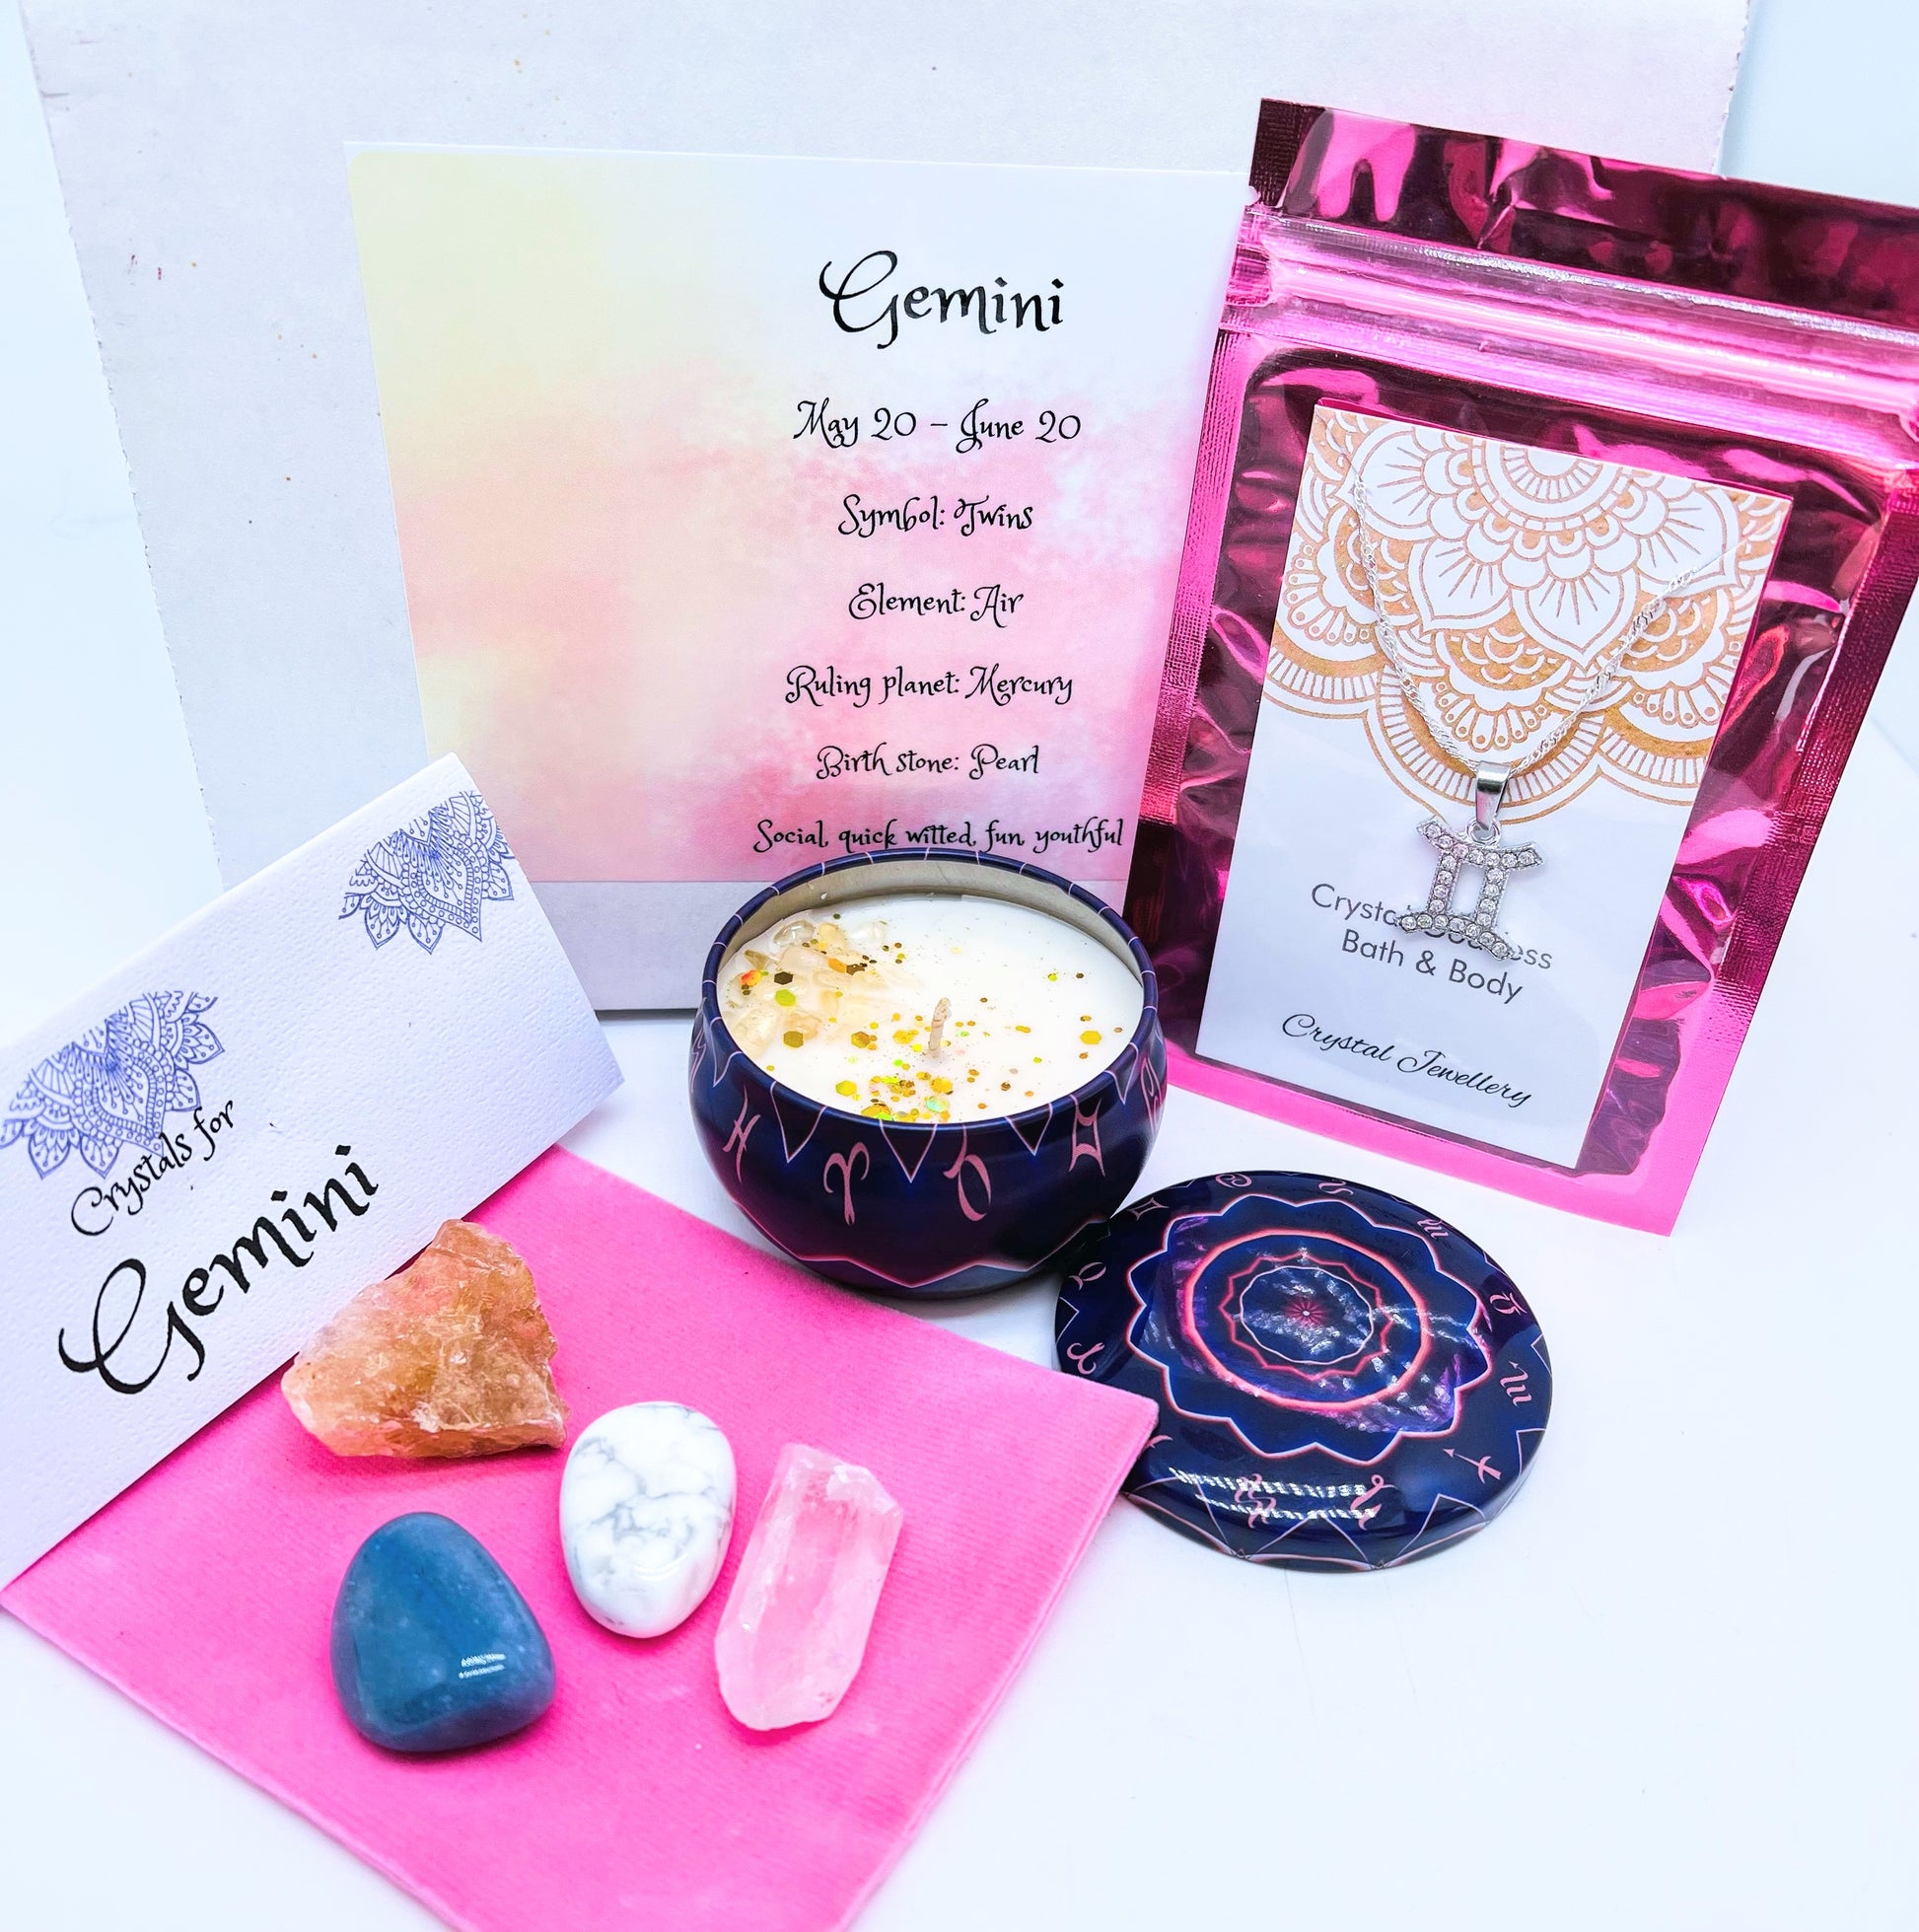 Gemini Zodiac gift box showing crystals for this sign and pendant necklace and crystal set.